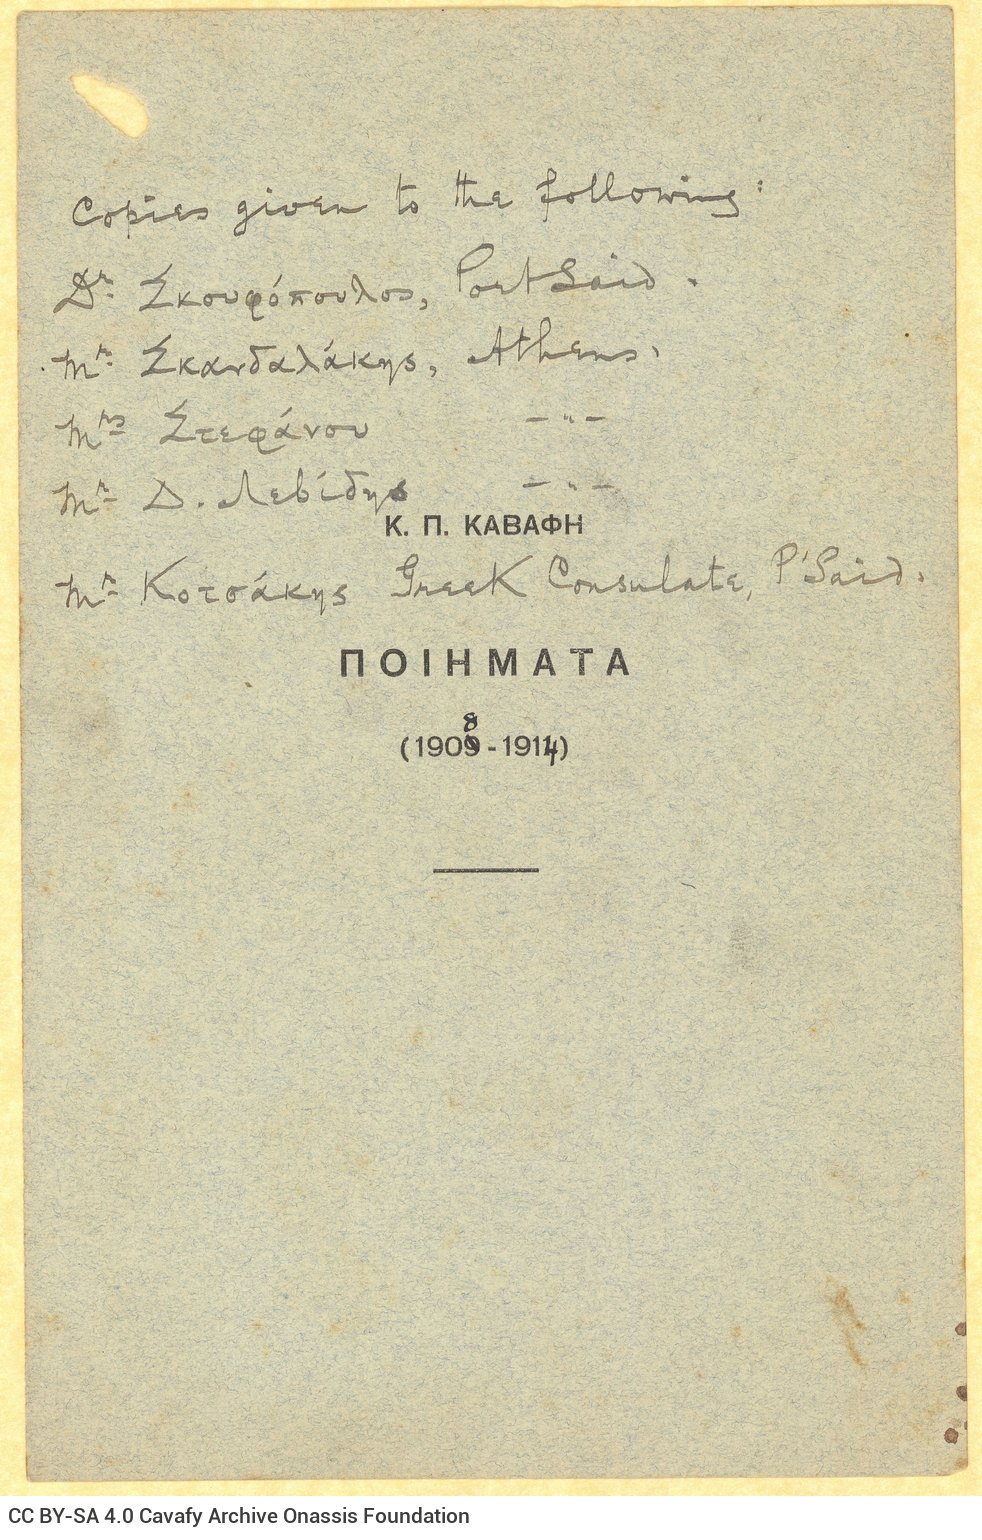 Handwritten note with names of recipients of copies, on a printed cover of a Cavafy poem Collection of the 1908-1914 perio